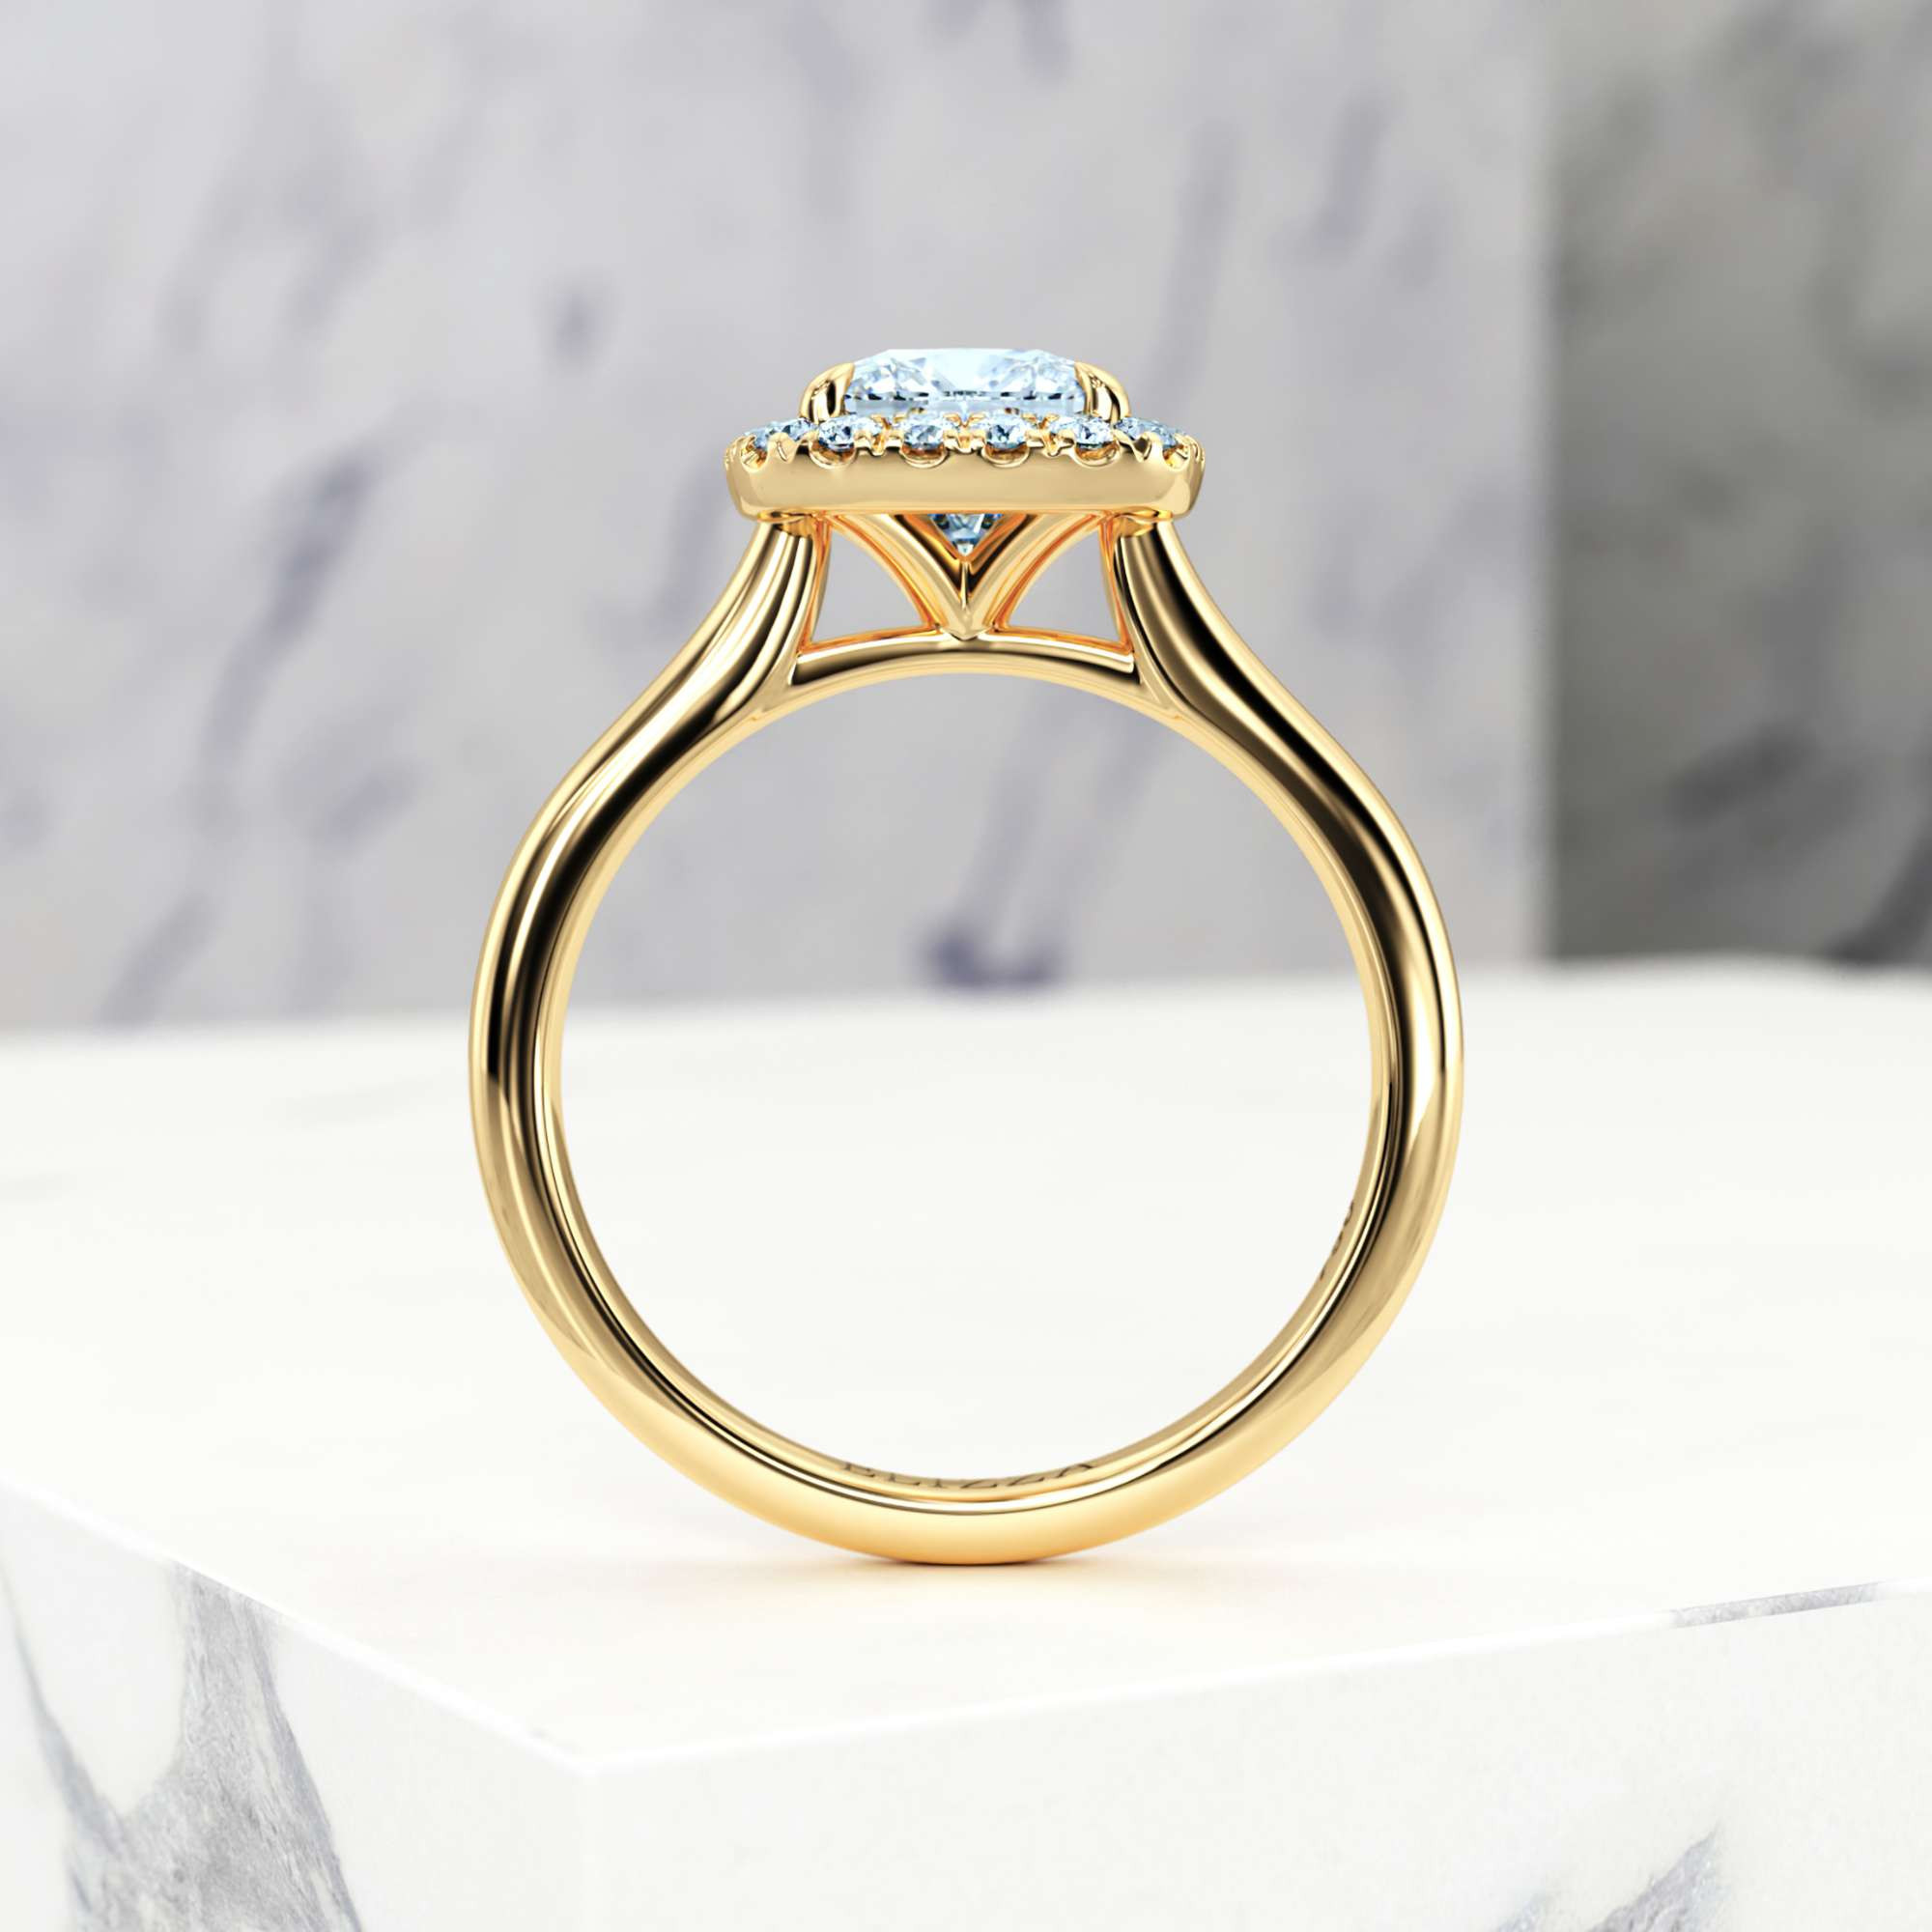 Verlobungsring Effie Square Cushion | Square cushion | 14K Gelbgold | Natural | GIA Certified | 0.30ct SI1 H 5